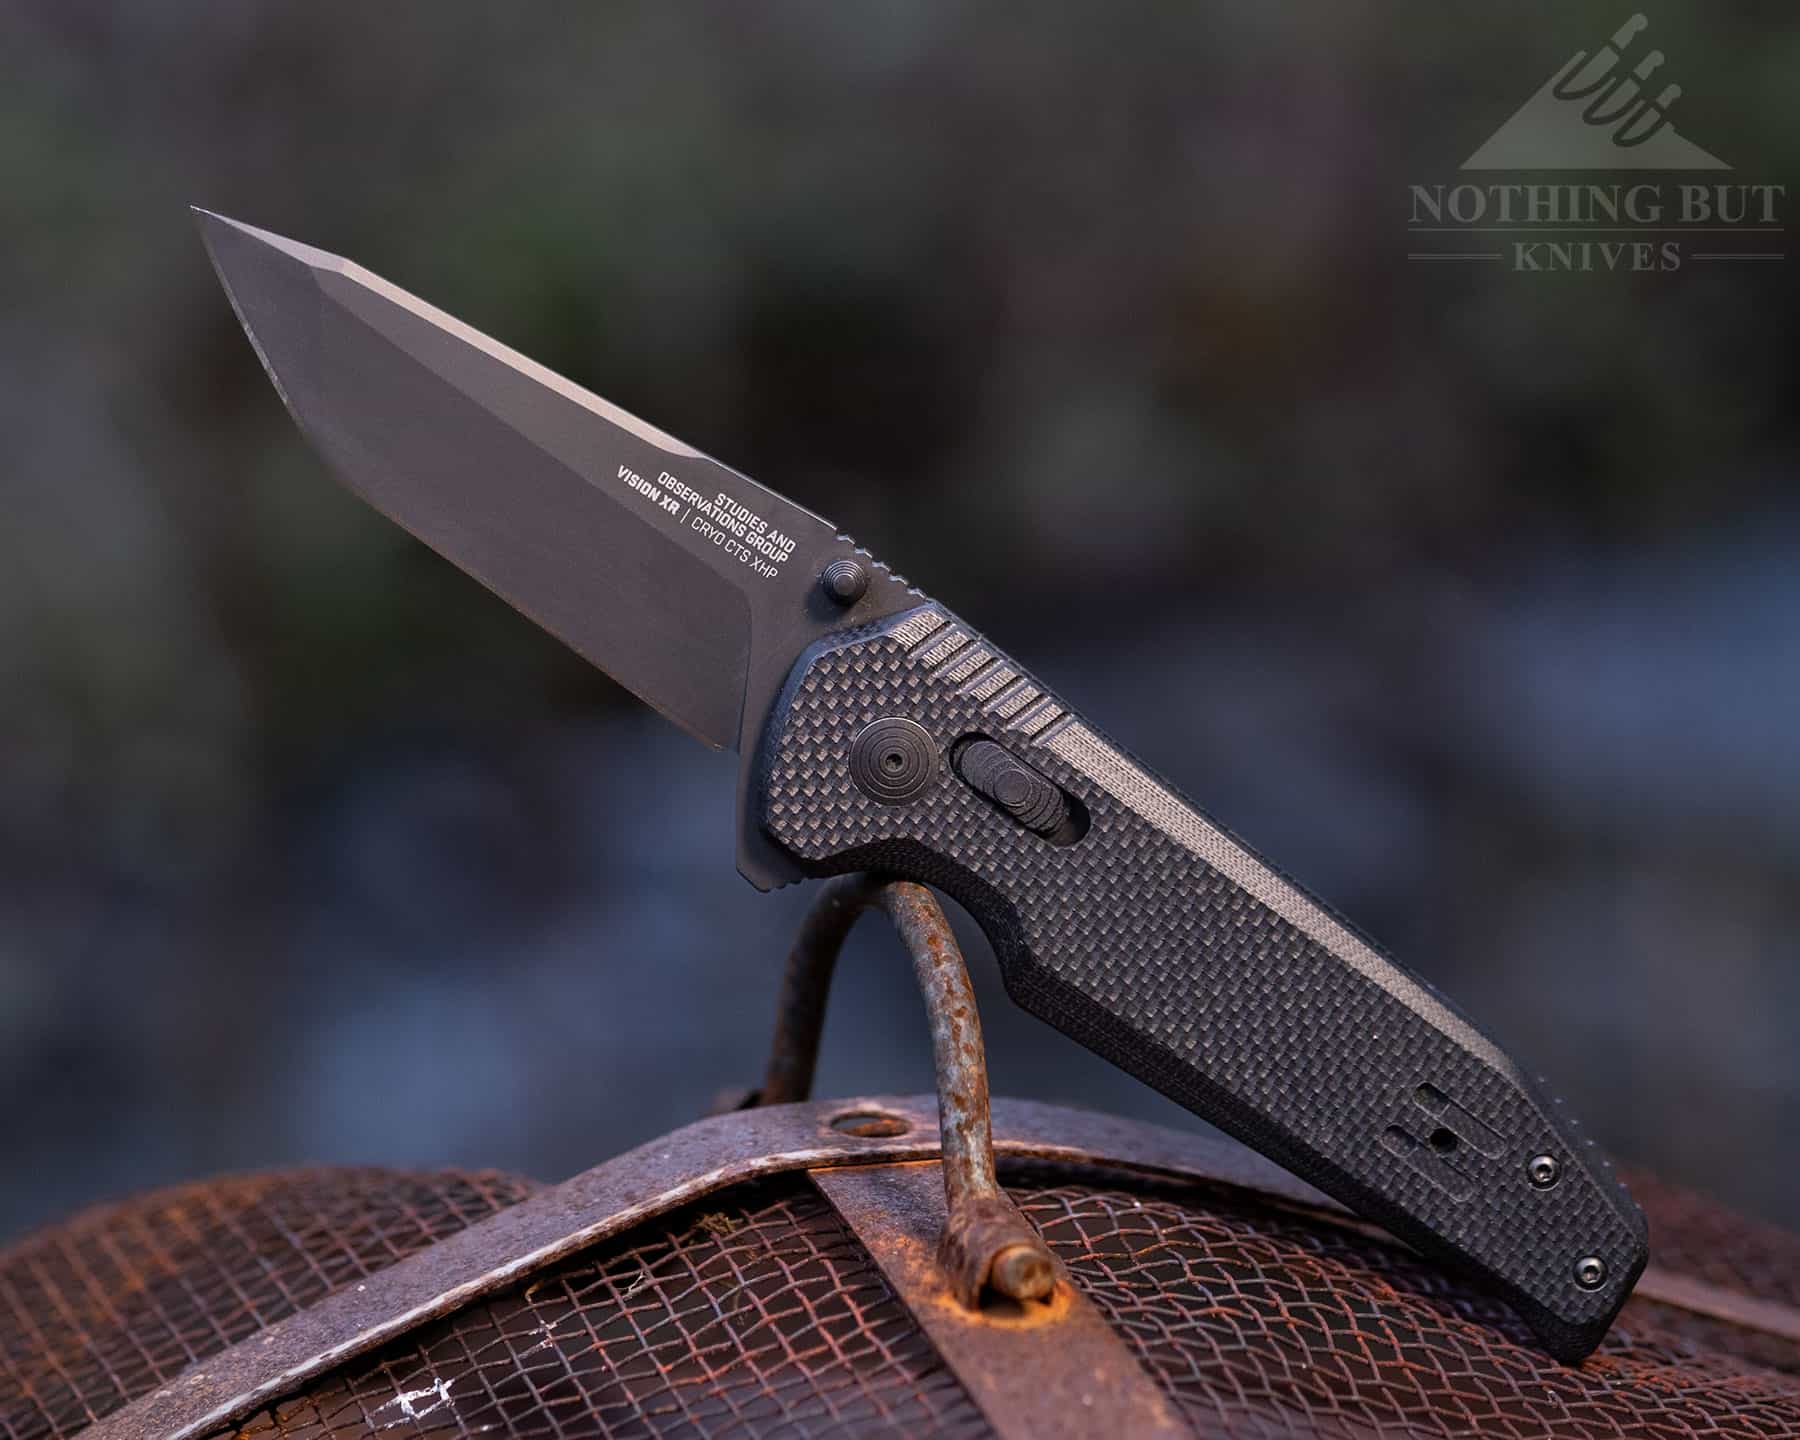 The SOG Vision XR is a slightly more expensive alternative to the Vosteed Thunderbird.